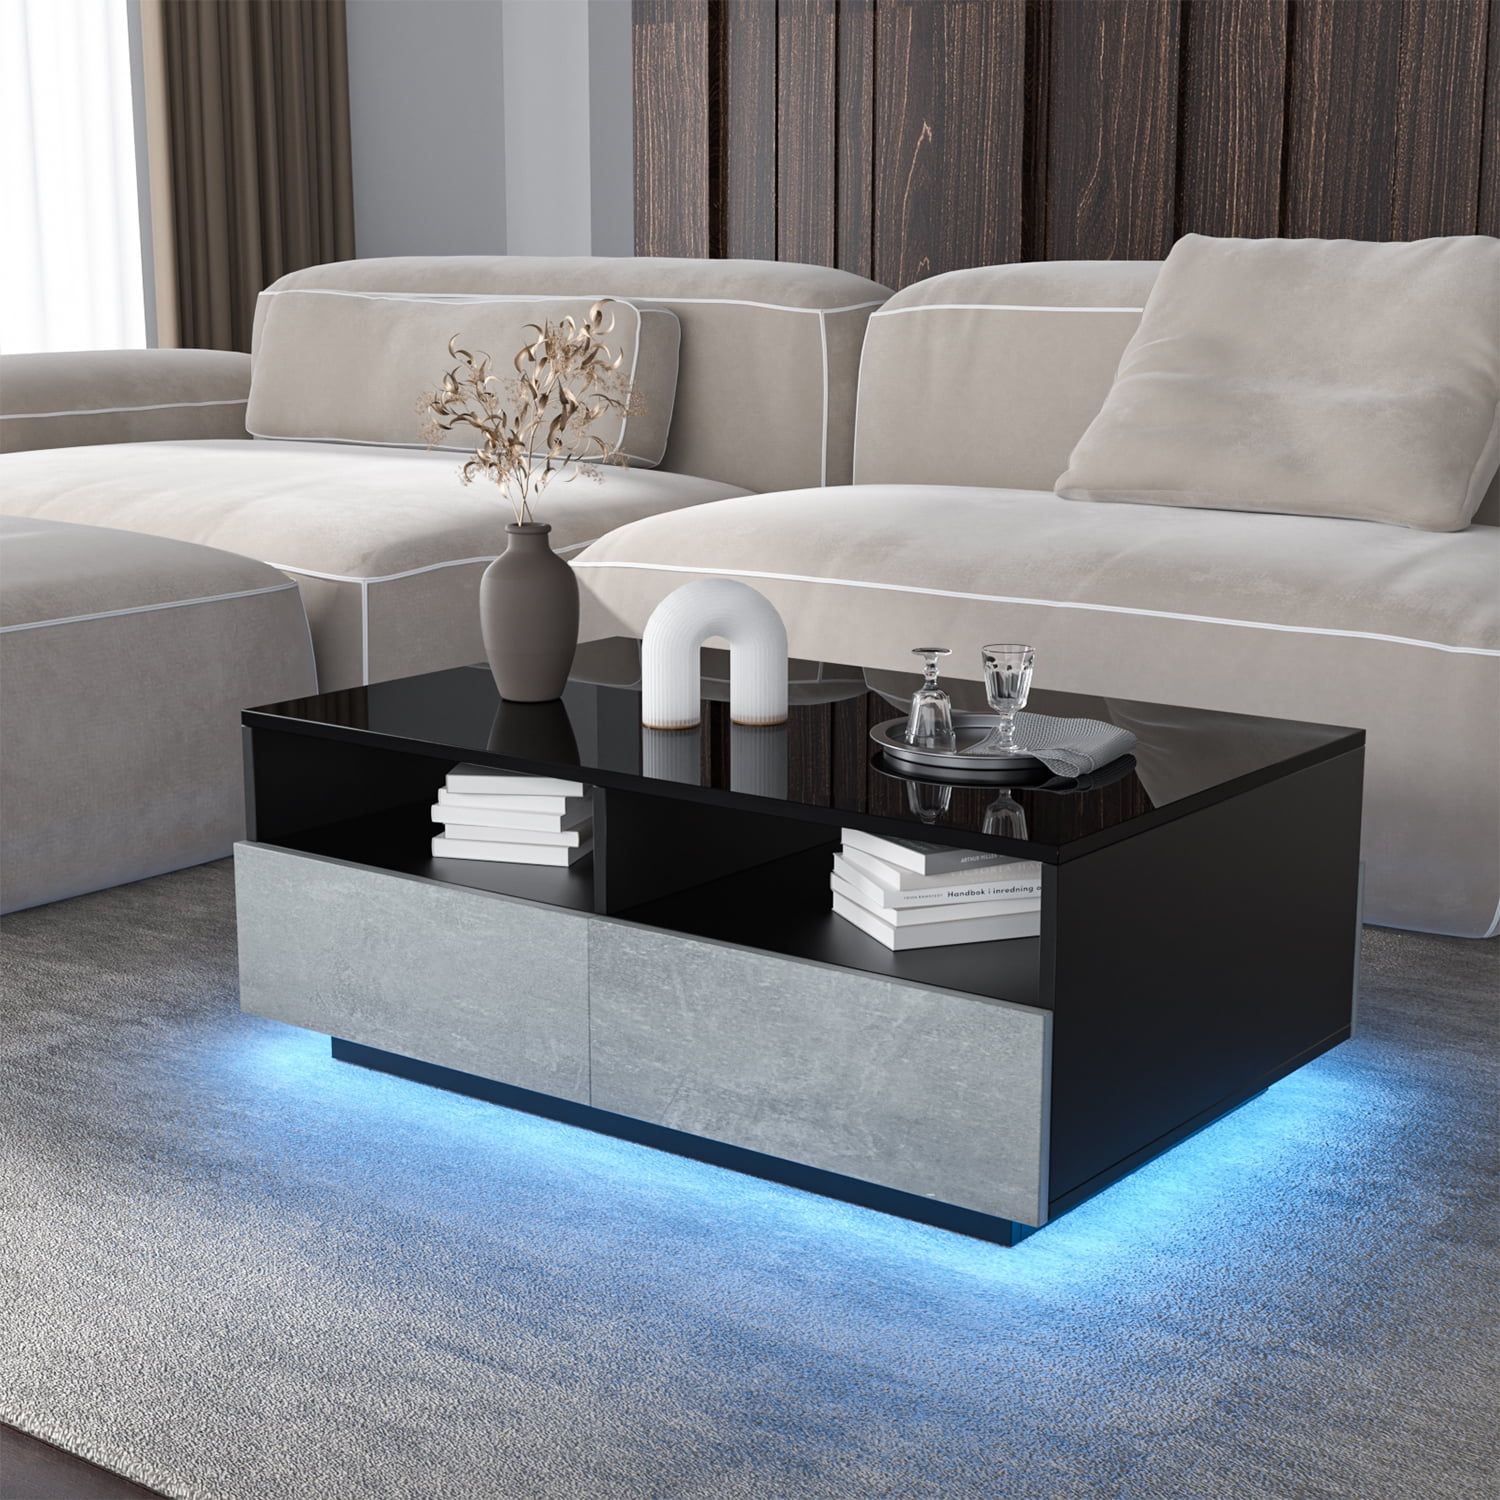 Hommpa Coffee Table Rgb Led Rectangular Center Table With Remote Control  Mordern Sofa Side Cocktail Storage Tables Gray Black For Living Room –  Walmart With Regard To Rectangular Led Coffee Tables (Photo 15 of 15)